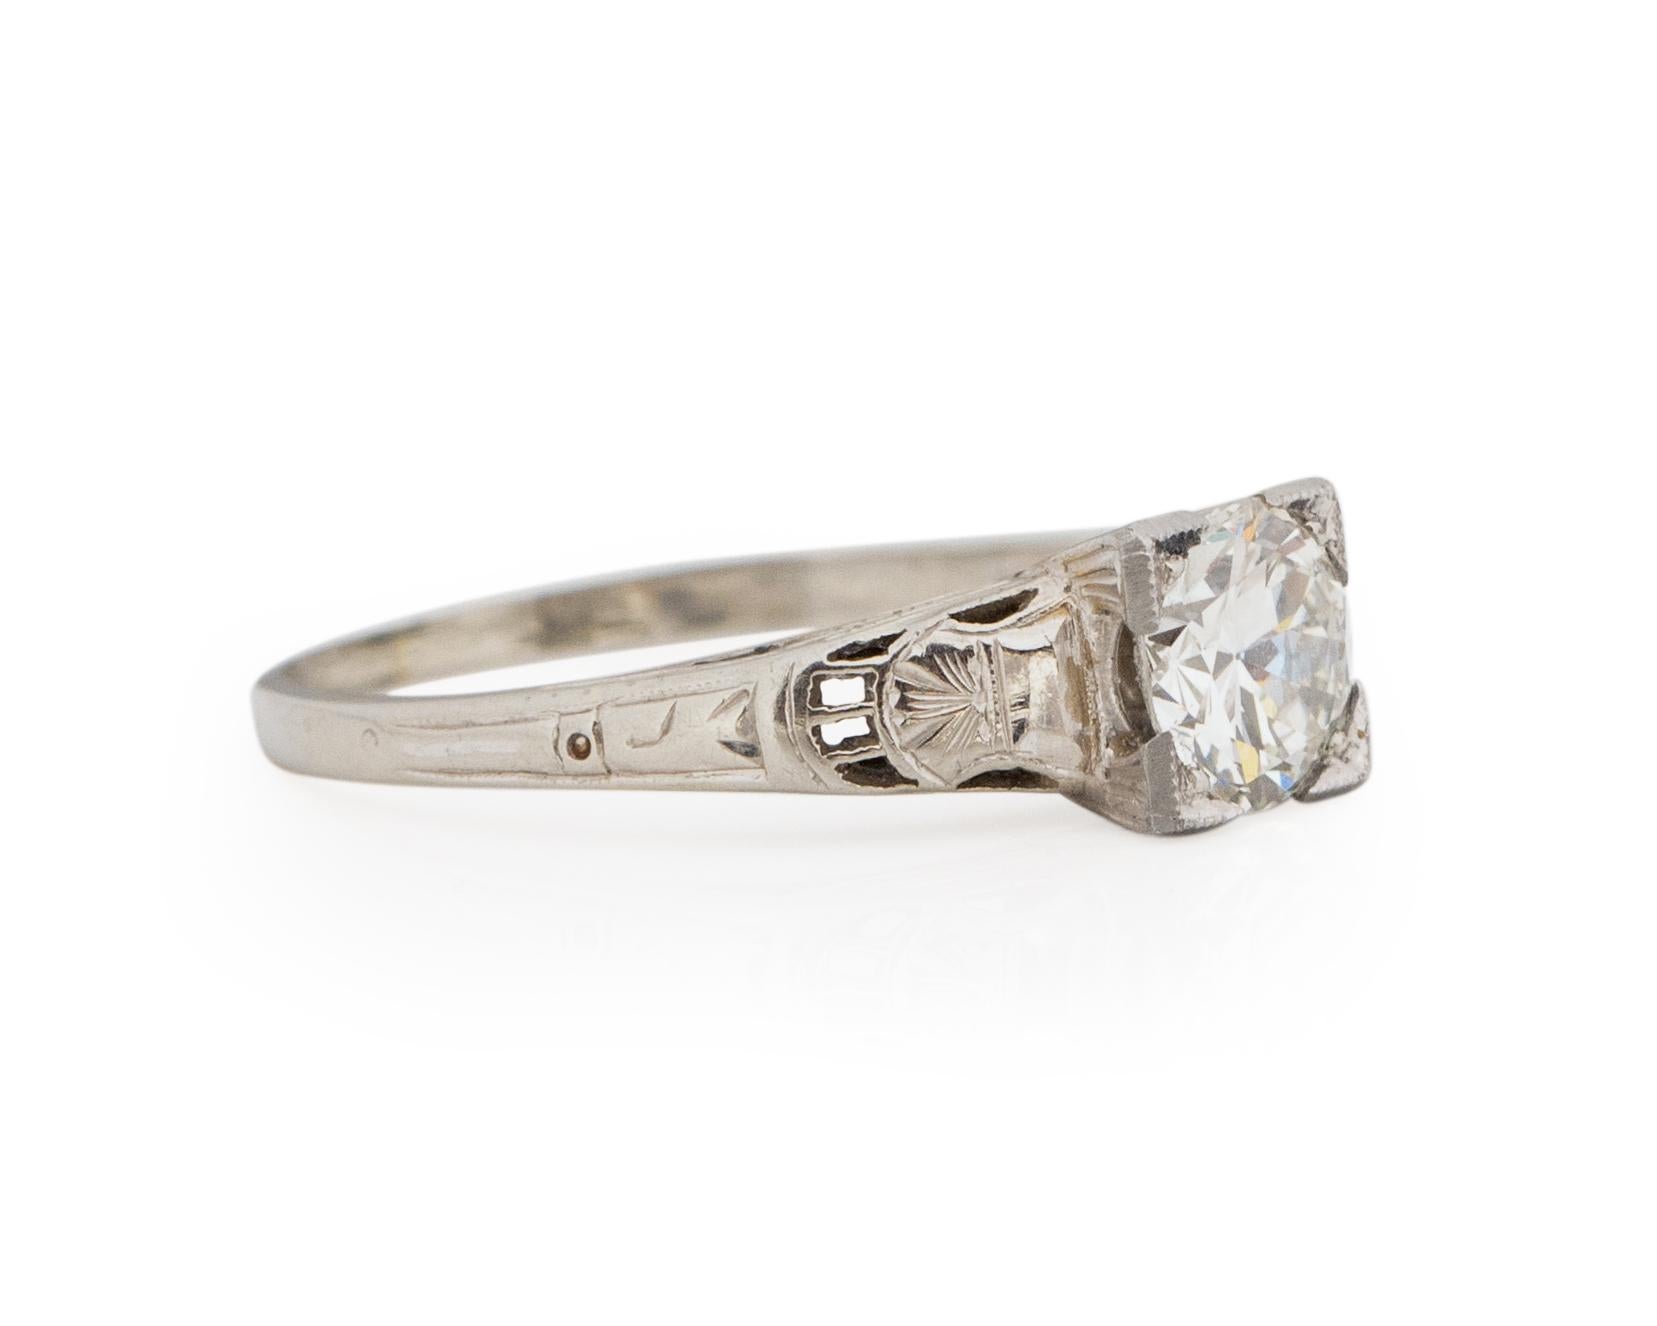 Ring Size: 6.25
Metal Type: 18karat White Gold [Hallmarked, and Tested]
Weight: 2.0 grams

Center Diamond Details:
GIA REPORT #: 6214895907
Weight: .80carat
Cut: Old European brilliant
Color: I
Clarity: VS2
Measurements: 6.11mm x 5.94mm x